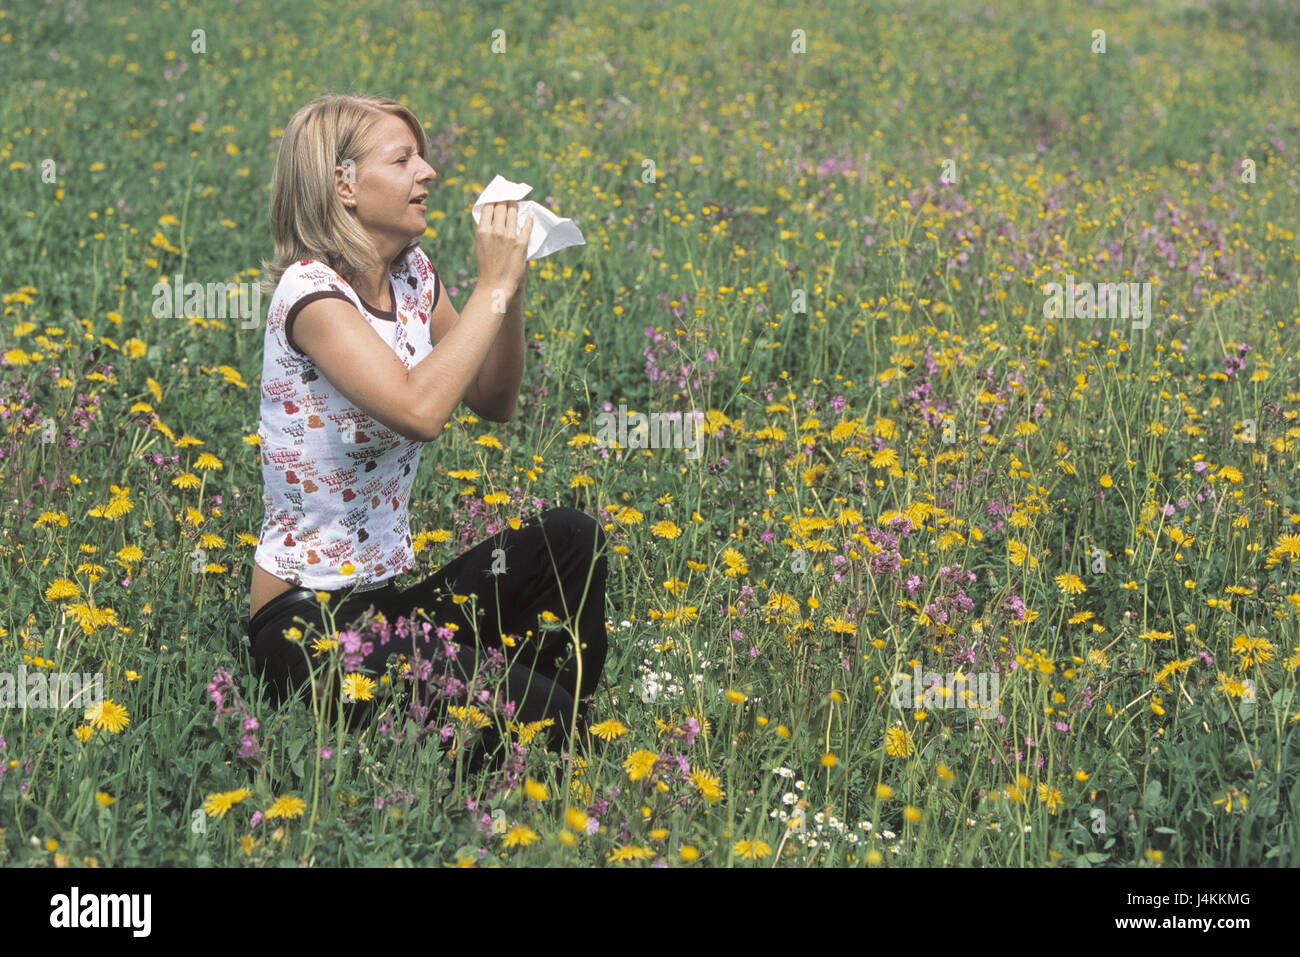 Flower meadow, woman, young, pollinosises, sneeze, clean handkerchief summer, spring, meadow, flowers, blossoms, polling flight, polling, pollen, Allergikerin, allergy, polling allergy, irritation, reaction, allergically, to walrus moustaches, allergens, flower pollings, polling allergy, disease, nose, coryza, grip, cold, outside Stock Photo